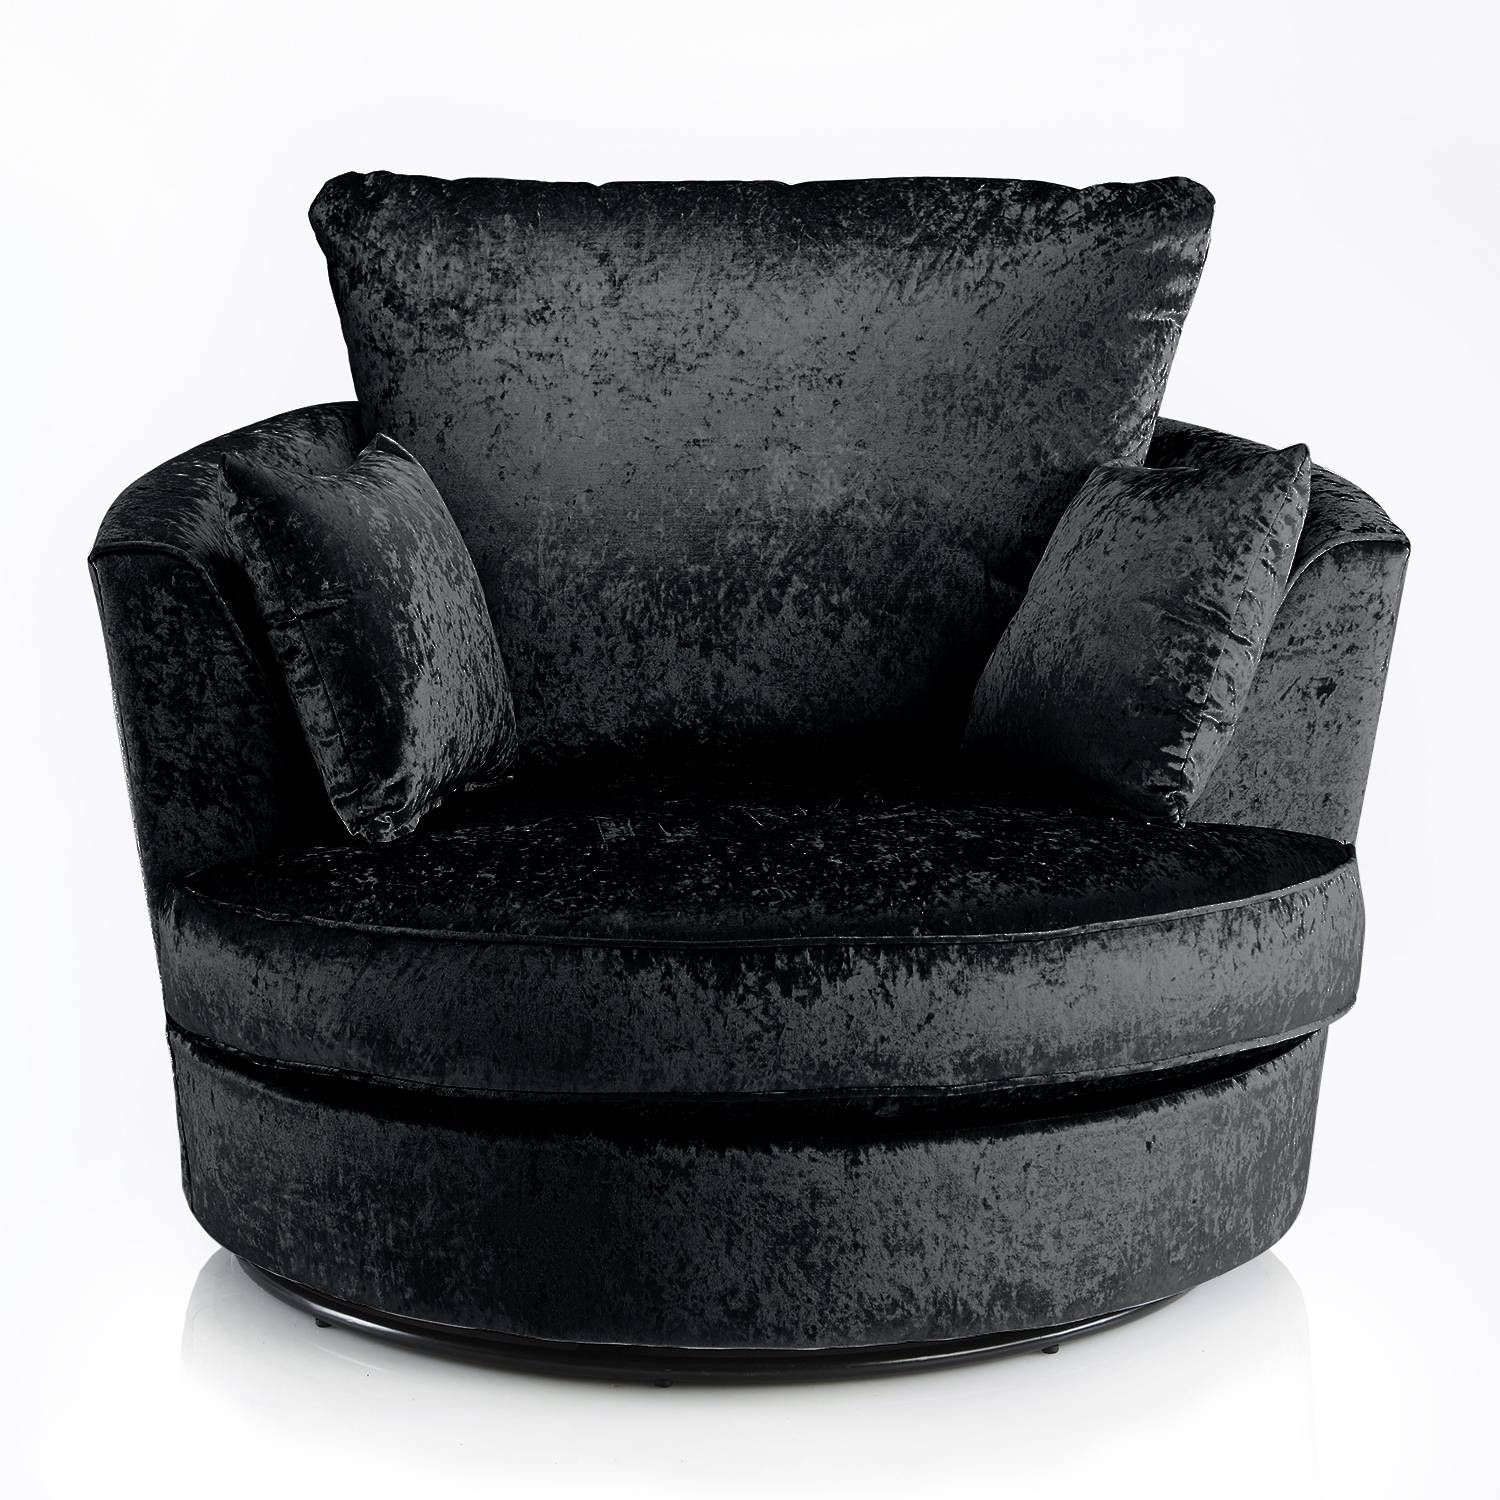 Crushed Velvet Furniture | Sofas, Beds, Chairs, Cushions Inside Cuddler Swivel Sofa Chairs (View 26 of 30)